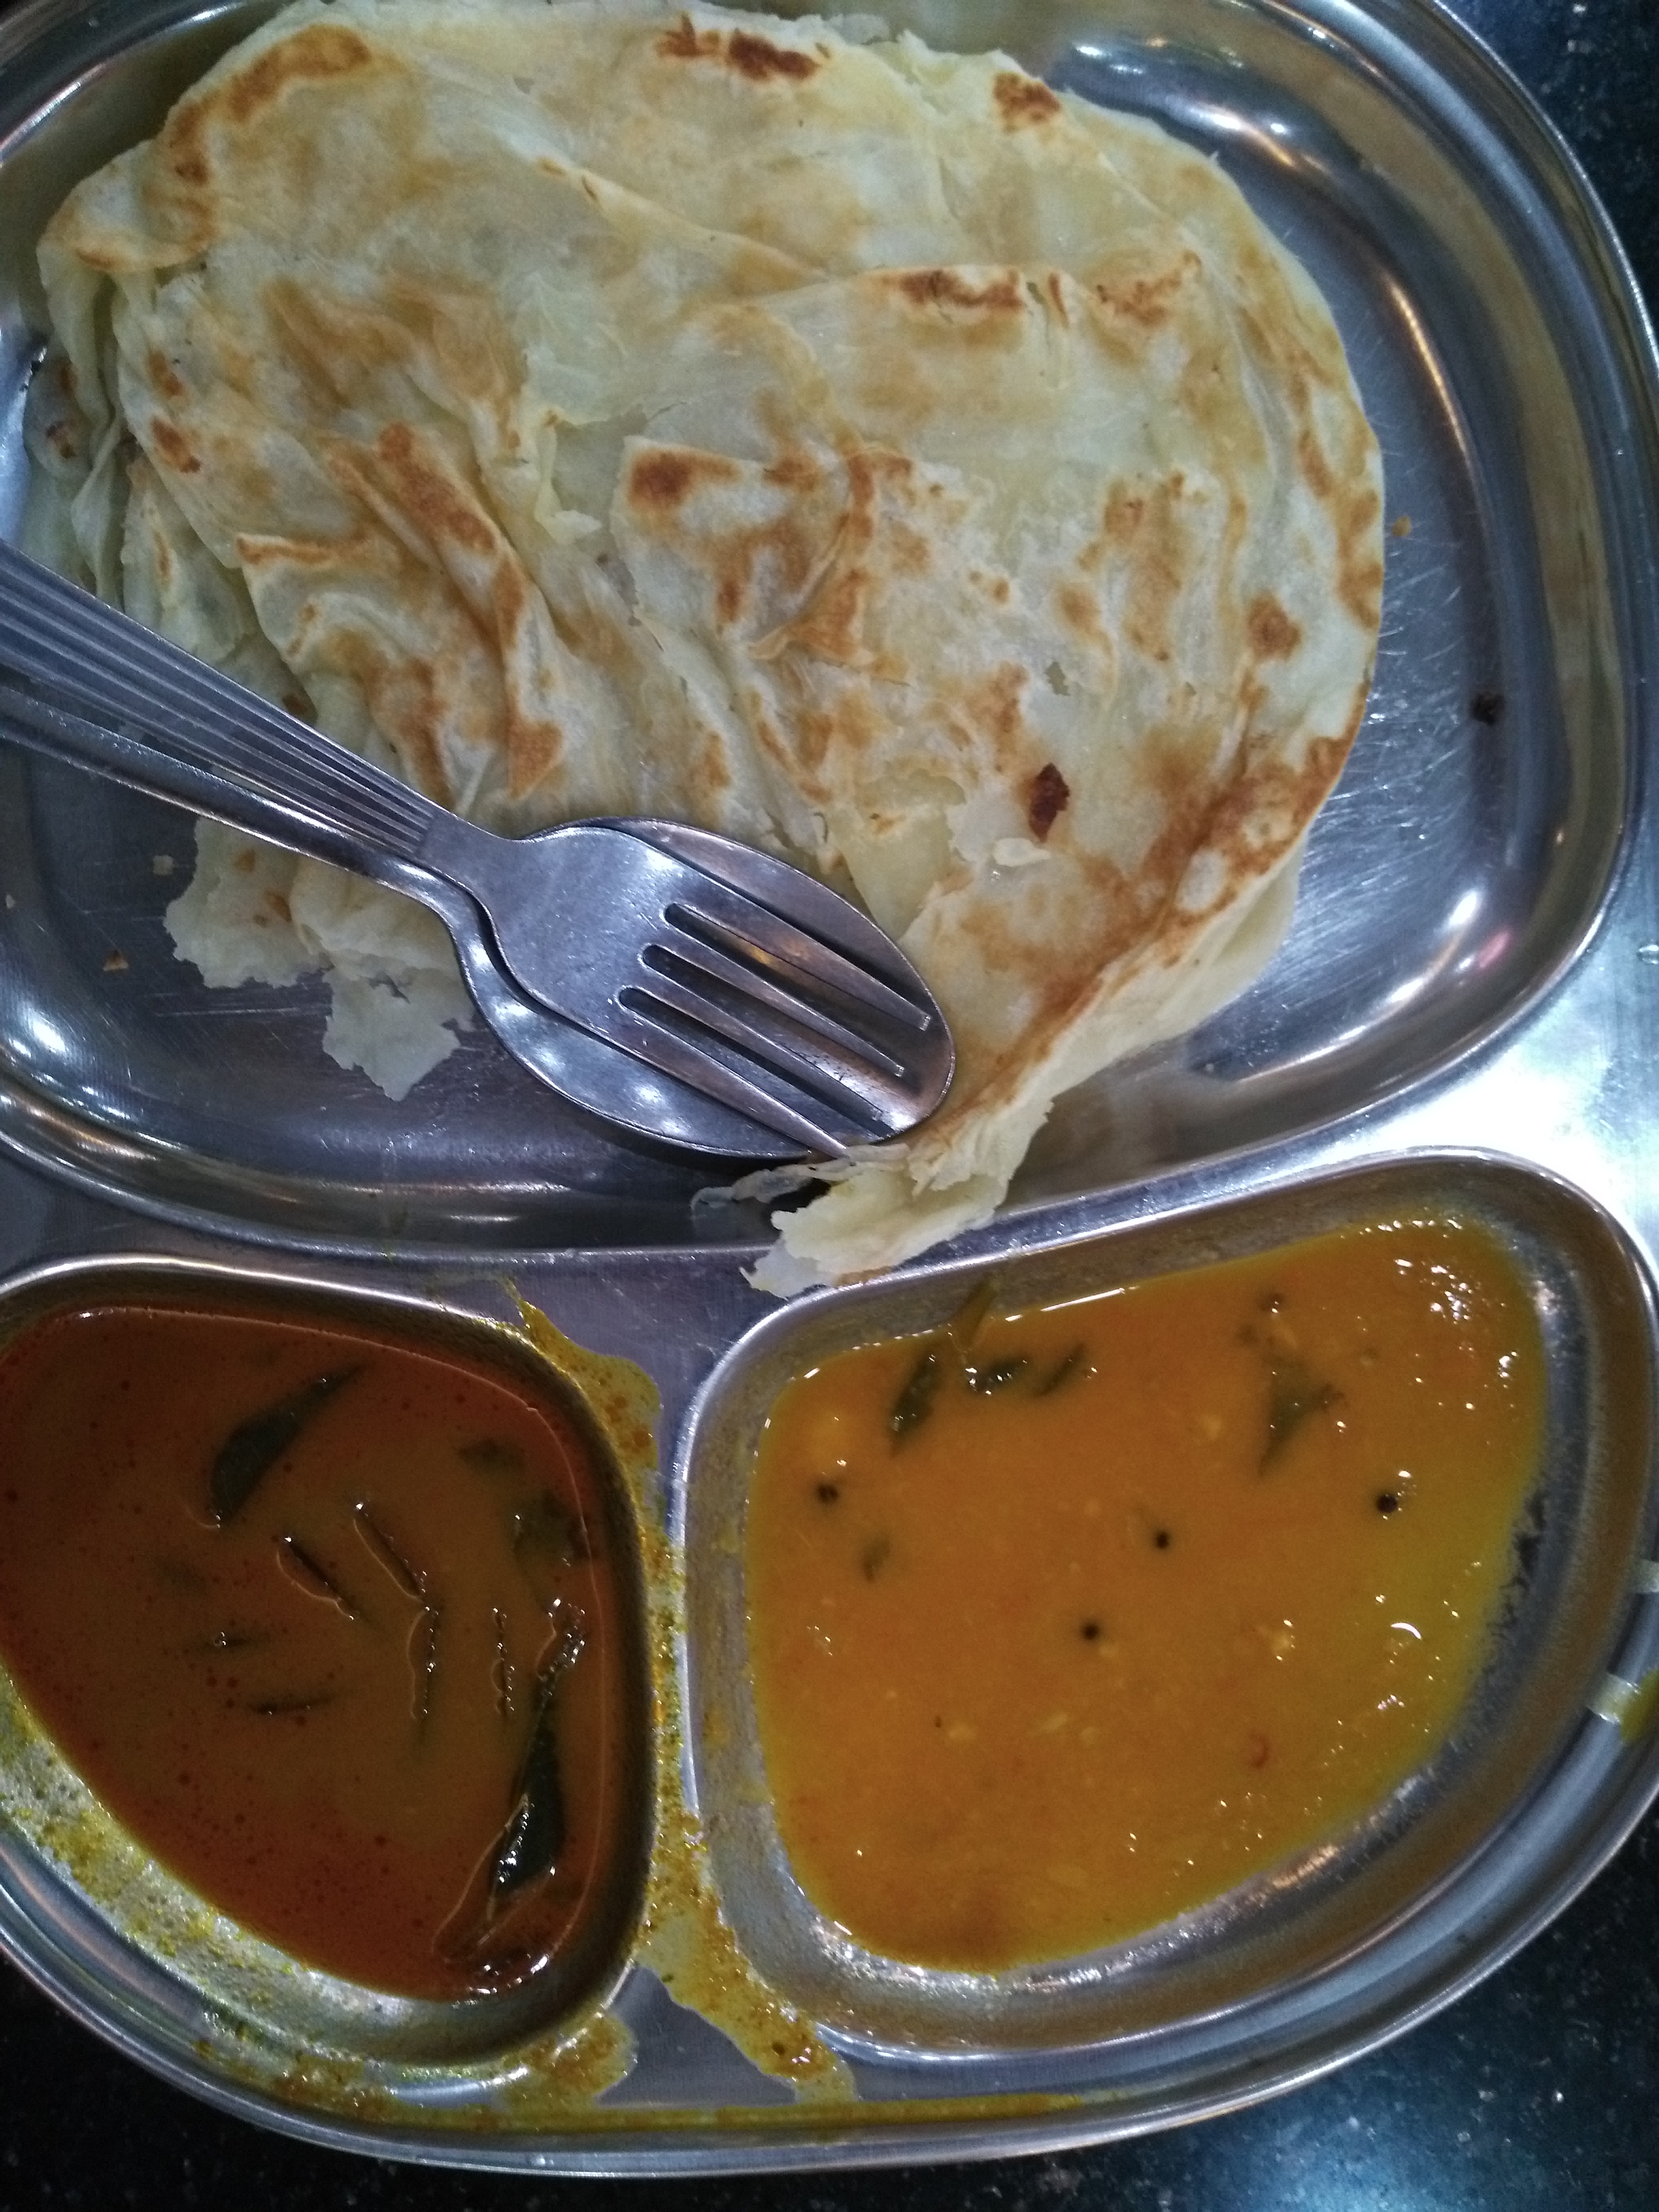 Roti chanai with some lentil and chutney action.